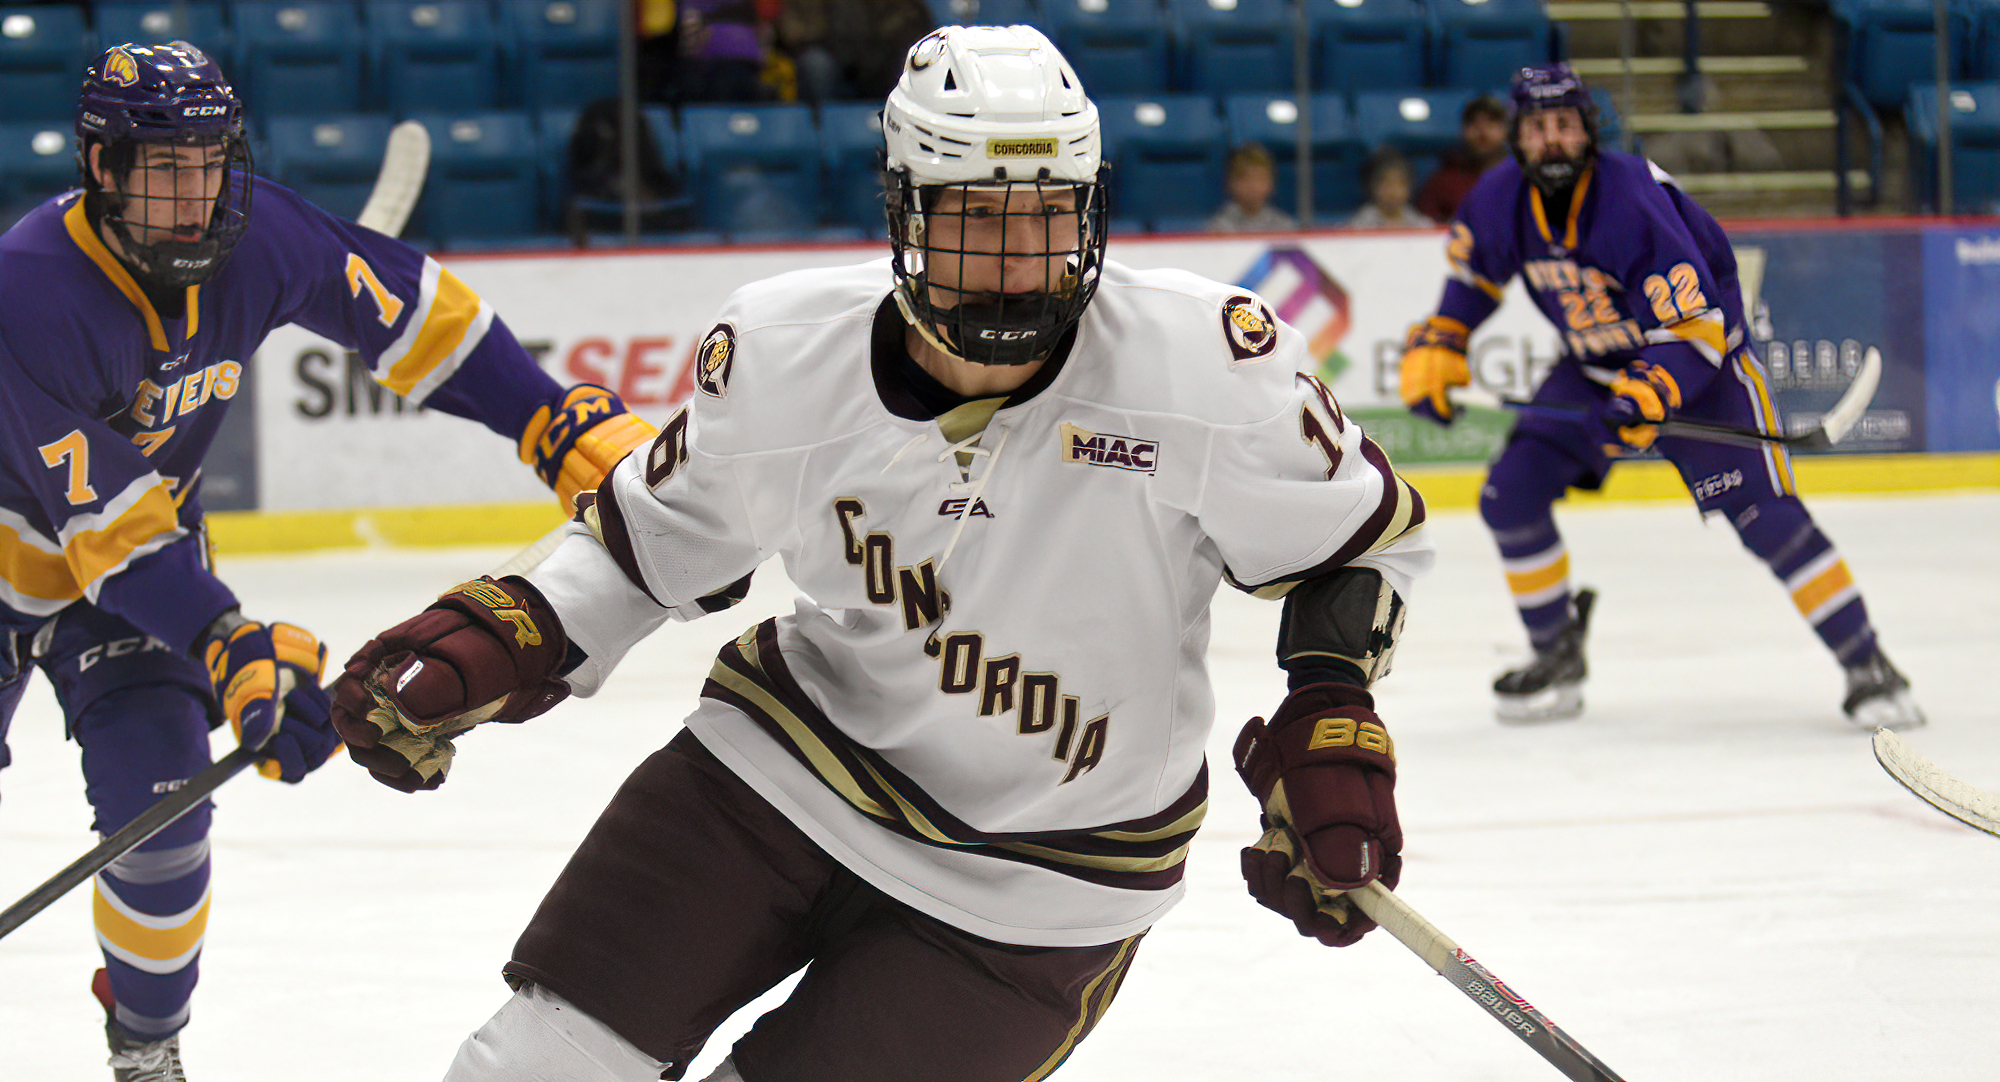 Kevin Ness recorded his second straight 2-goal game in the Cobbers' series opener at Augsburg. Ness now has five goals in the last five games.